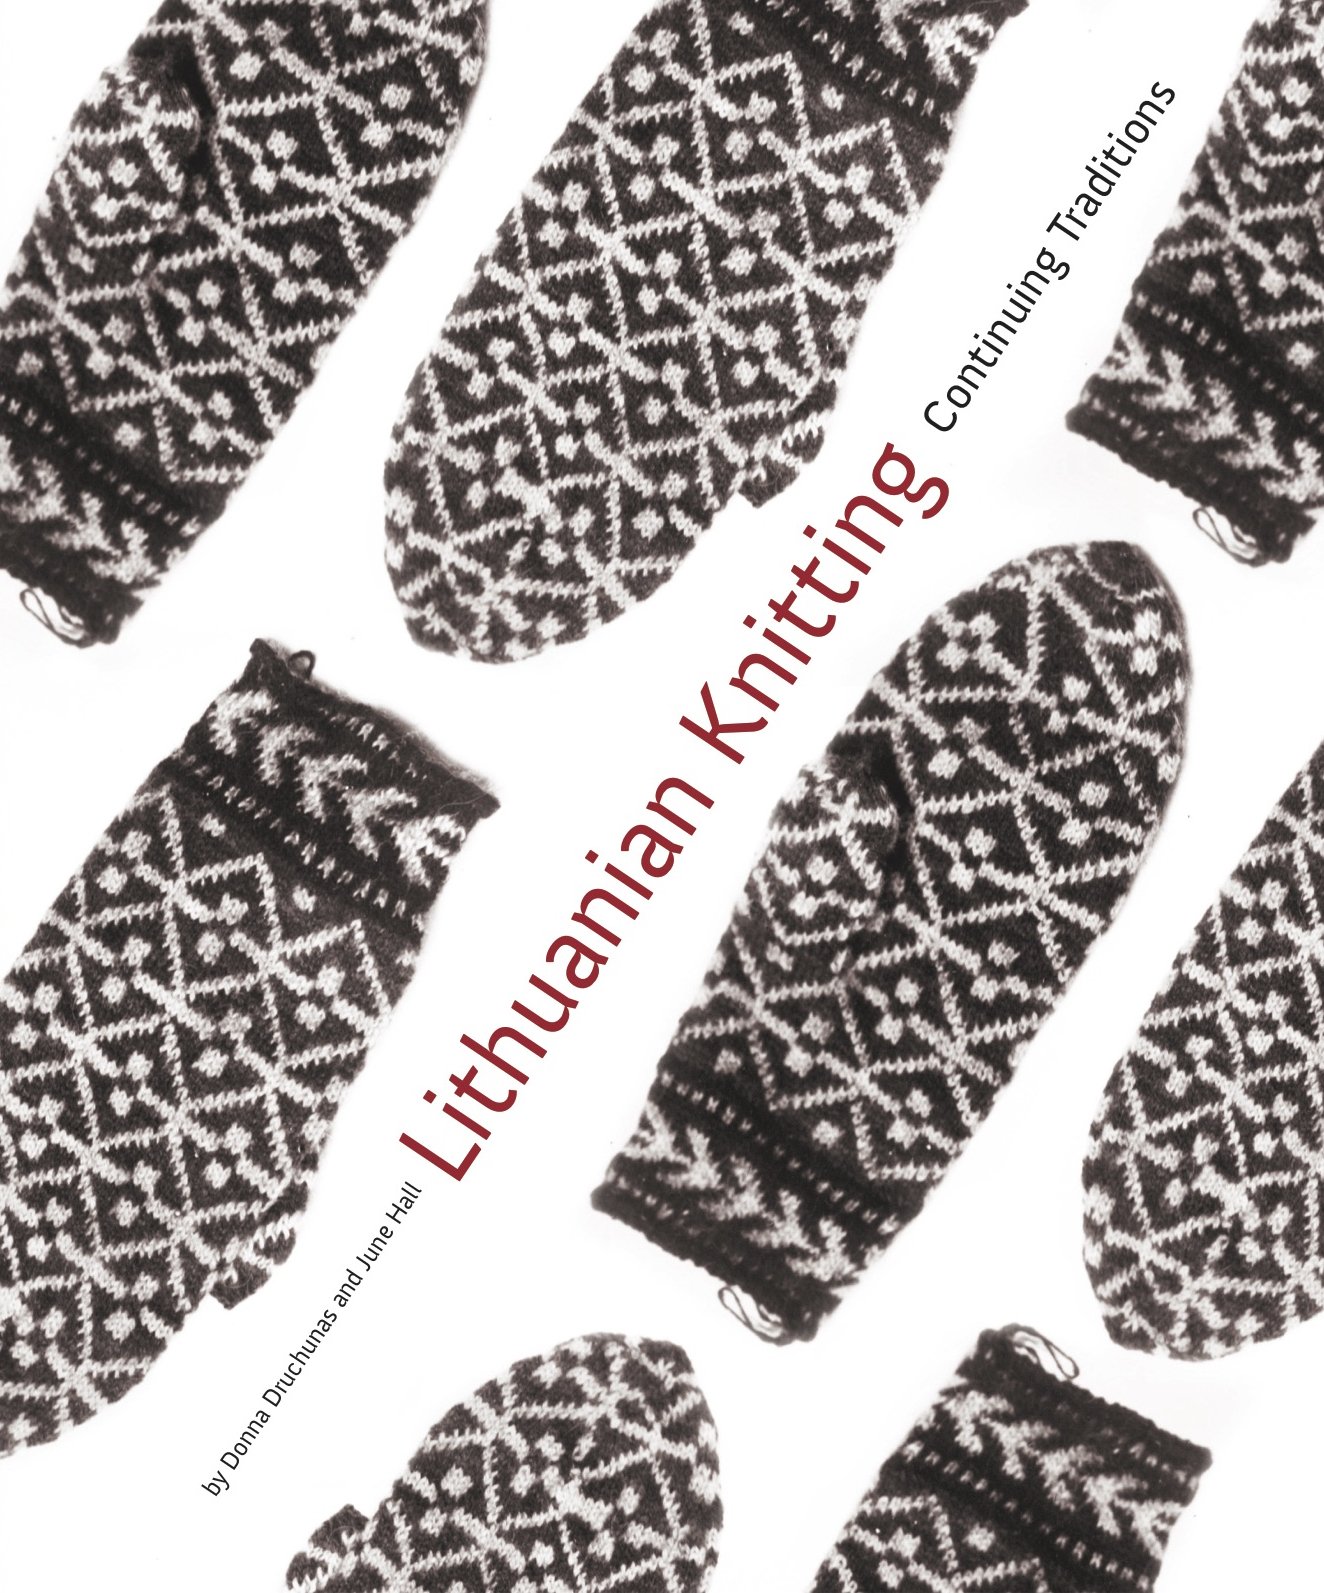 Lithuanian Knitting: Continuing Traditions, by Donna Druchunas and June Hall, published October 2015